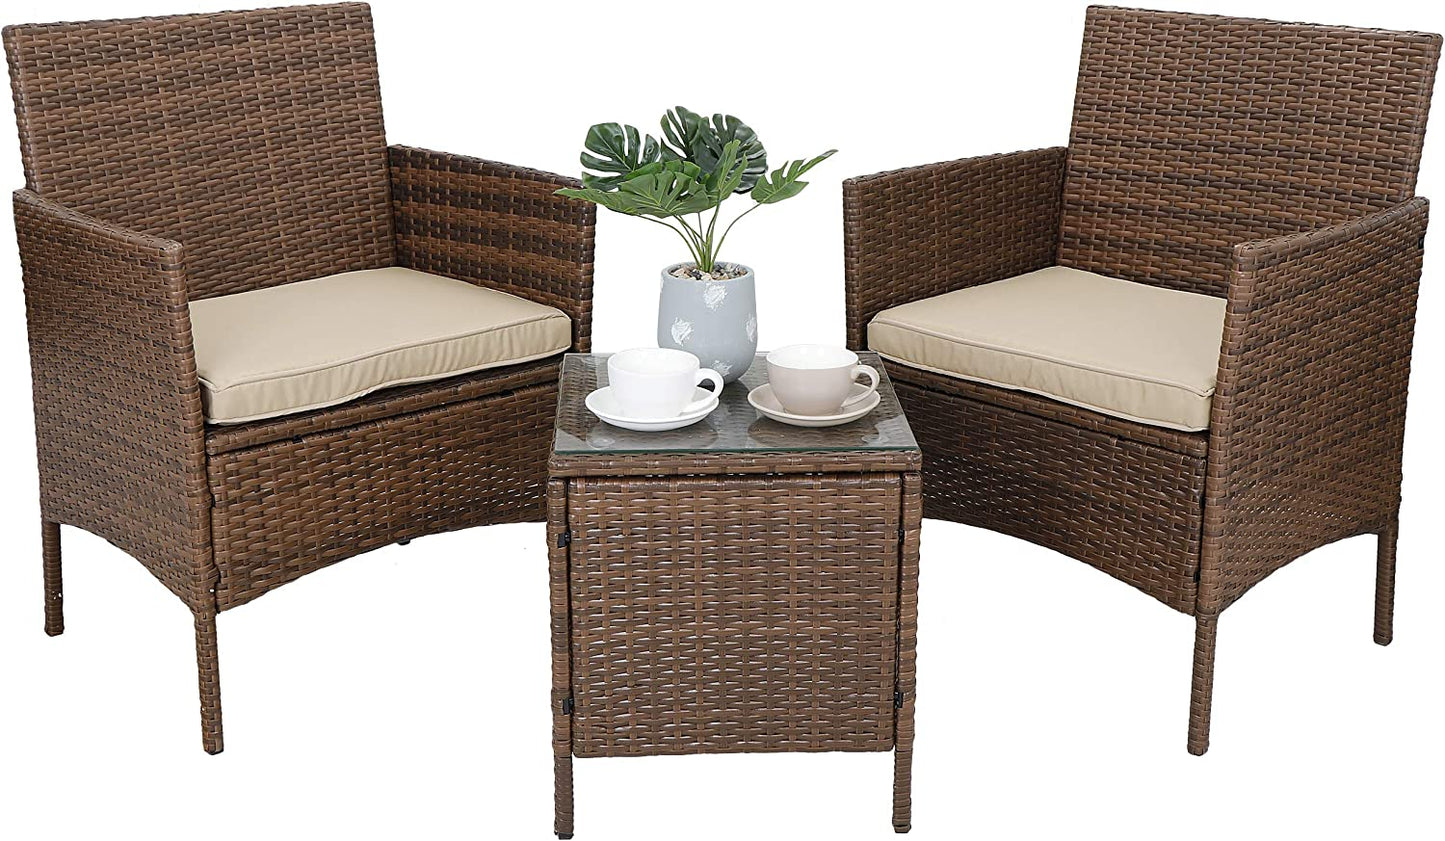 3 Pieces Outdoor Patio Furniture Sets PE Rattan Wicker Chair with Table,Porch Garden Backyard Poolside Balcony Furniture Sets Indoor Outdoor Use